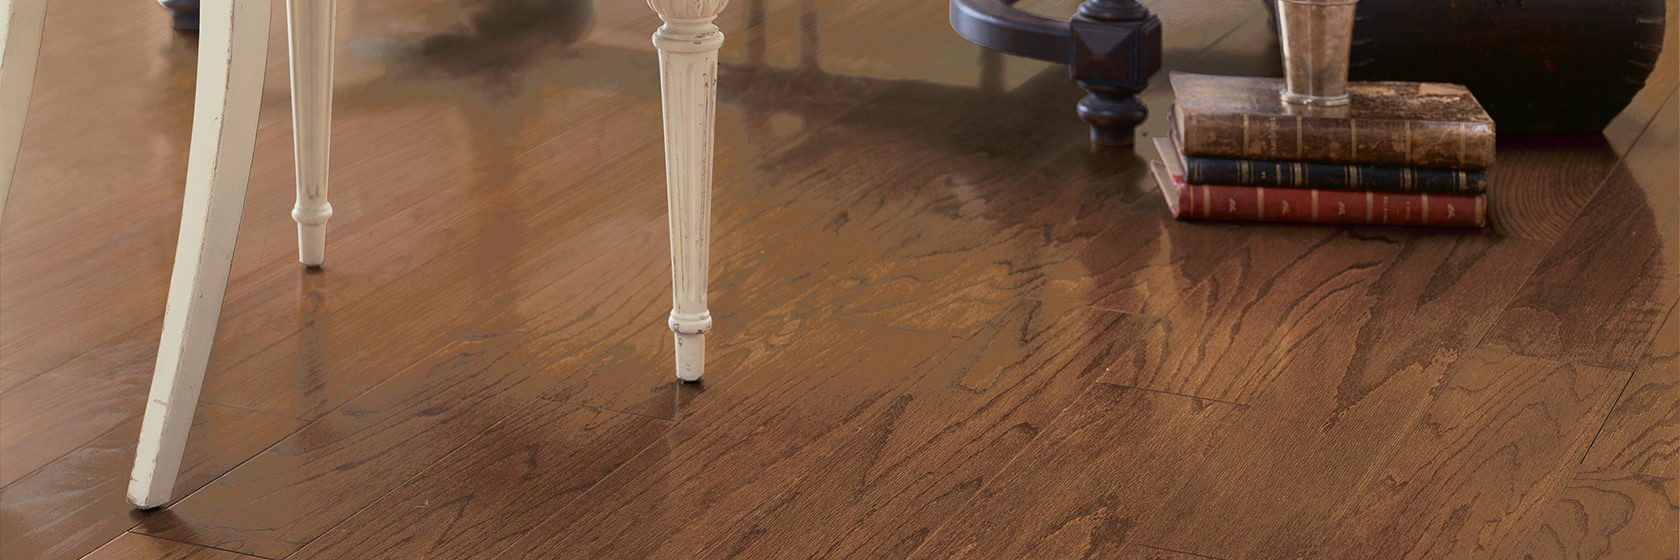 12 Spectacular Armstrong Hardwood Laminate Floor Cleaner Trigger Spray 2024 free download armstrong hardwood laminate floor cleaner trigger spray of oak engineered hardwood canyon bp421calg within hero l 1680 560